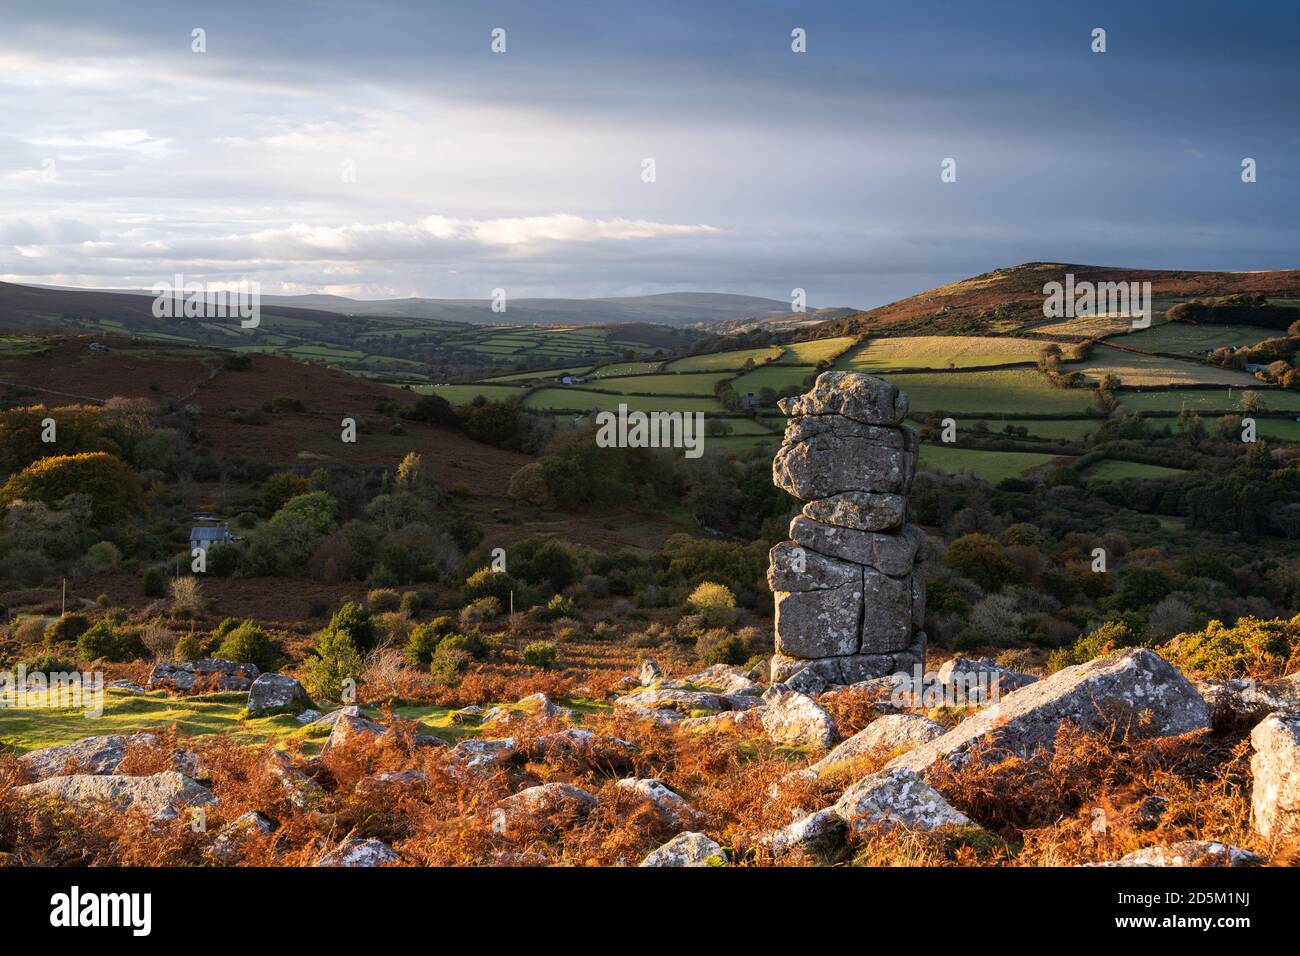 Dartmoor National Park, Devon, UK. 13th Oct, 2020. UK Weather: Late afternoon light and golden autumnal colour in the landscape near Hound Tor, Dartmoor National Park, Devon. Credit: Celia McMahon/Alamy Live News Stock Photo